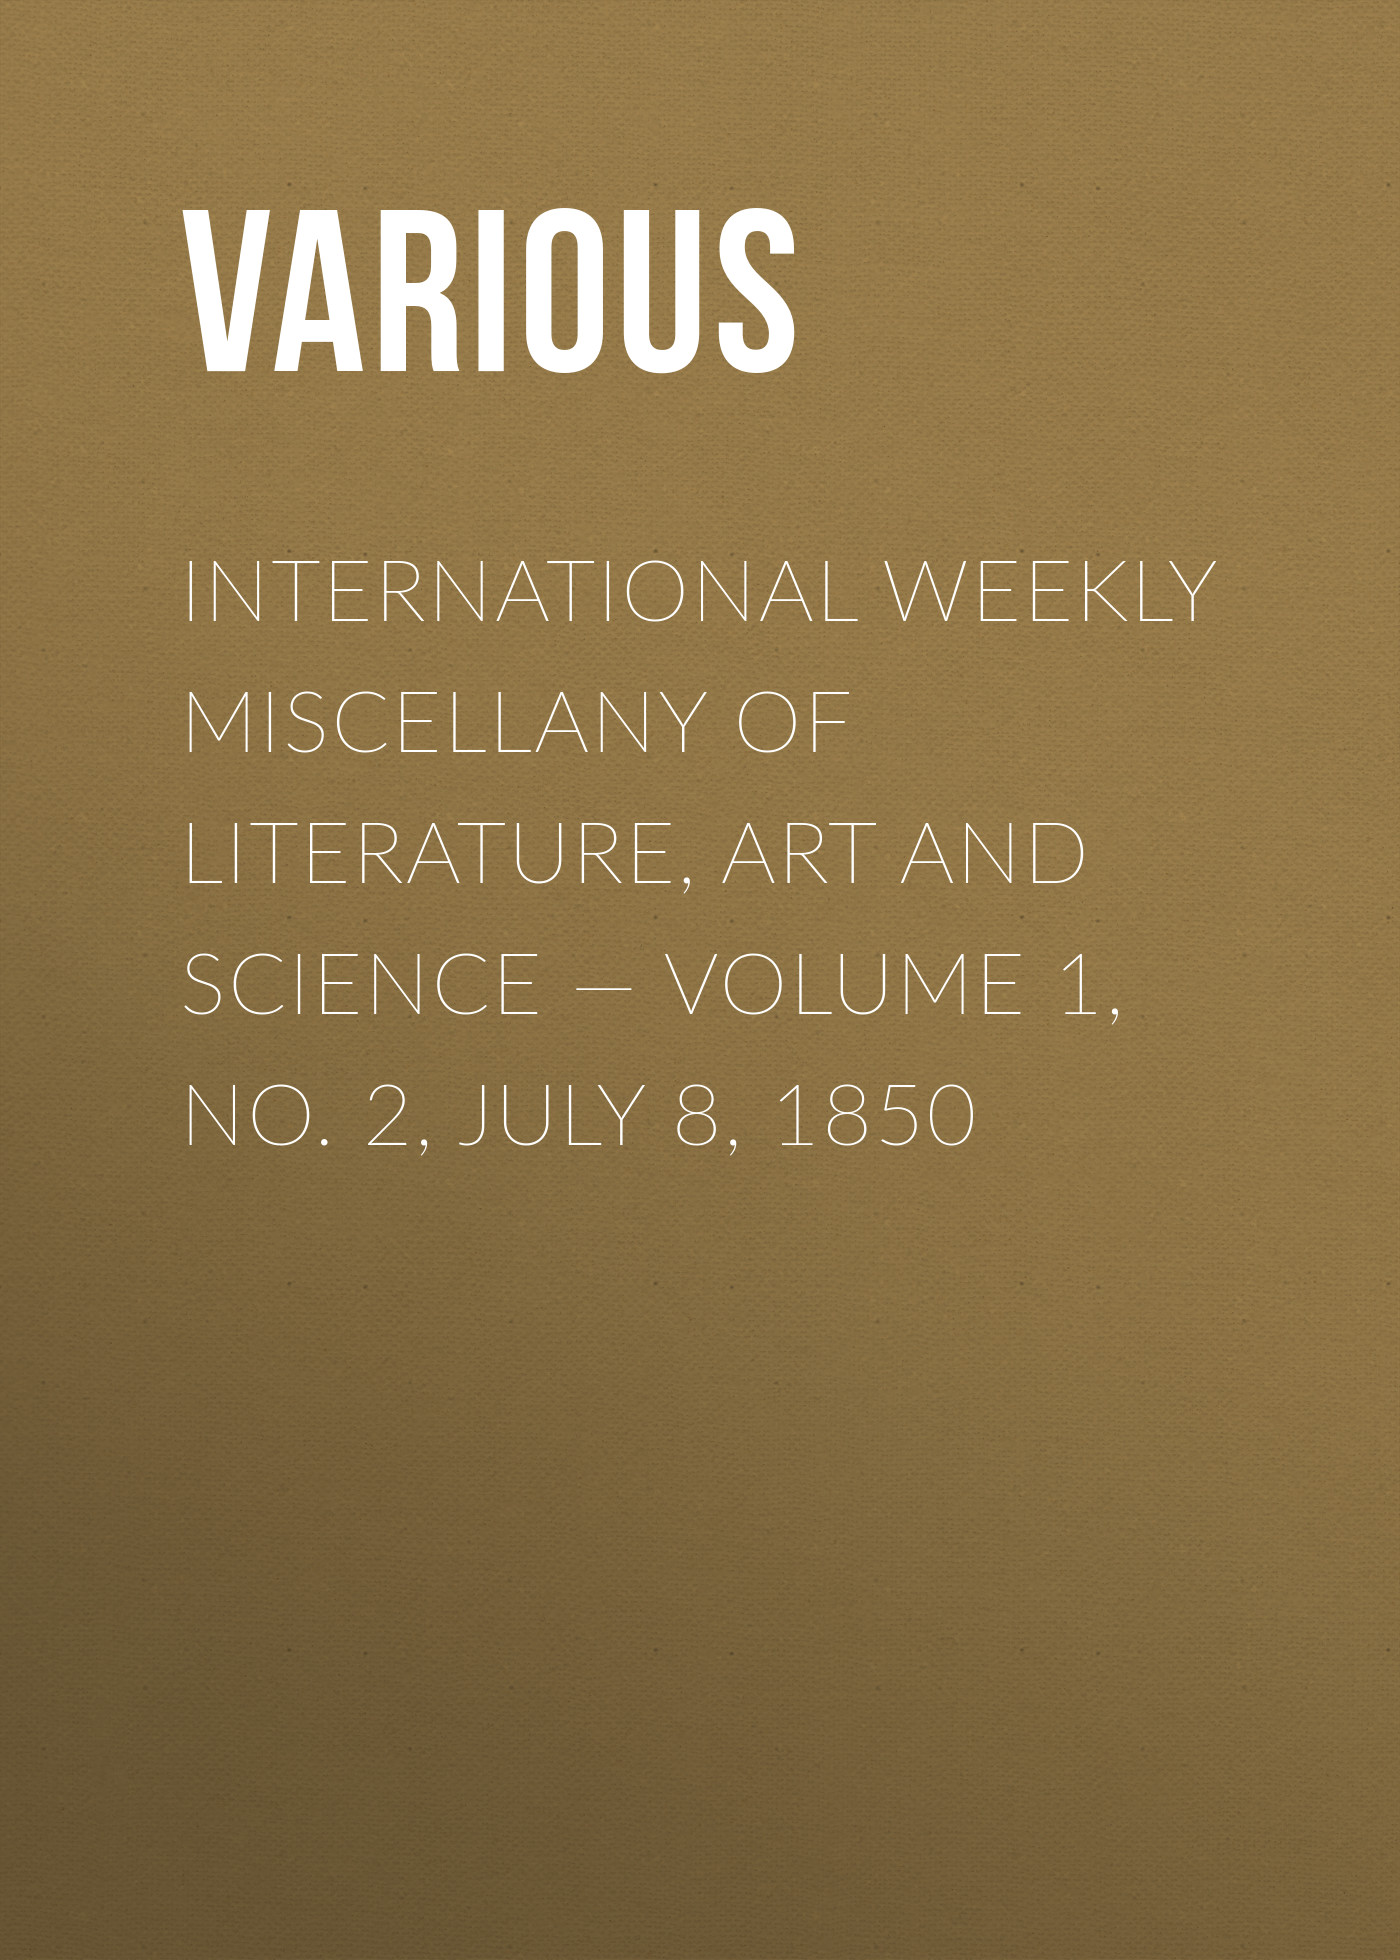 International Weekly Miscellany of Literature, Art and Science— Volume 1, No. 2, July 8, 1850